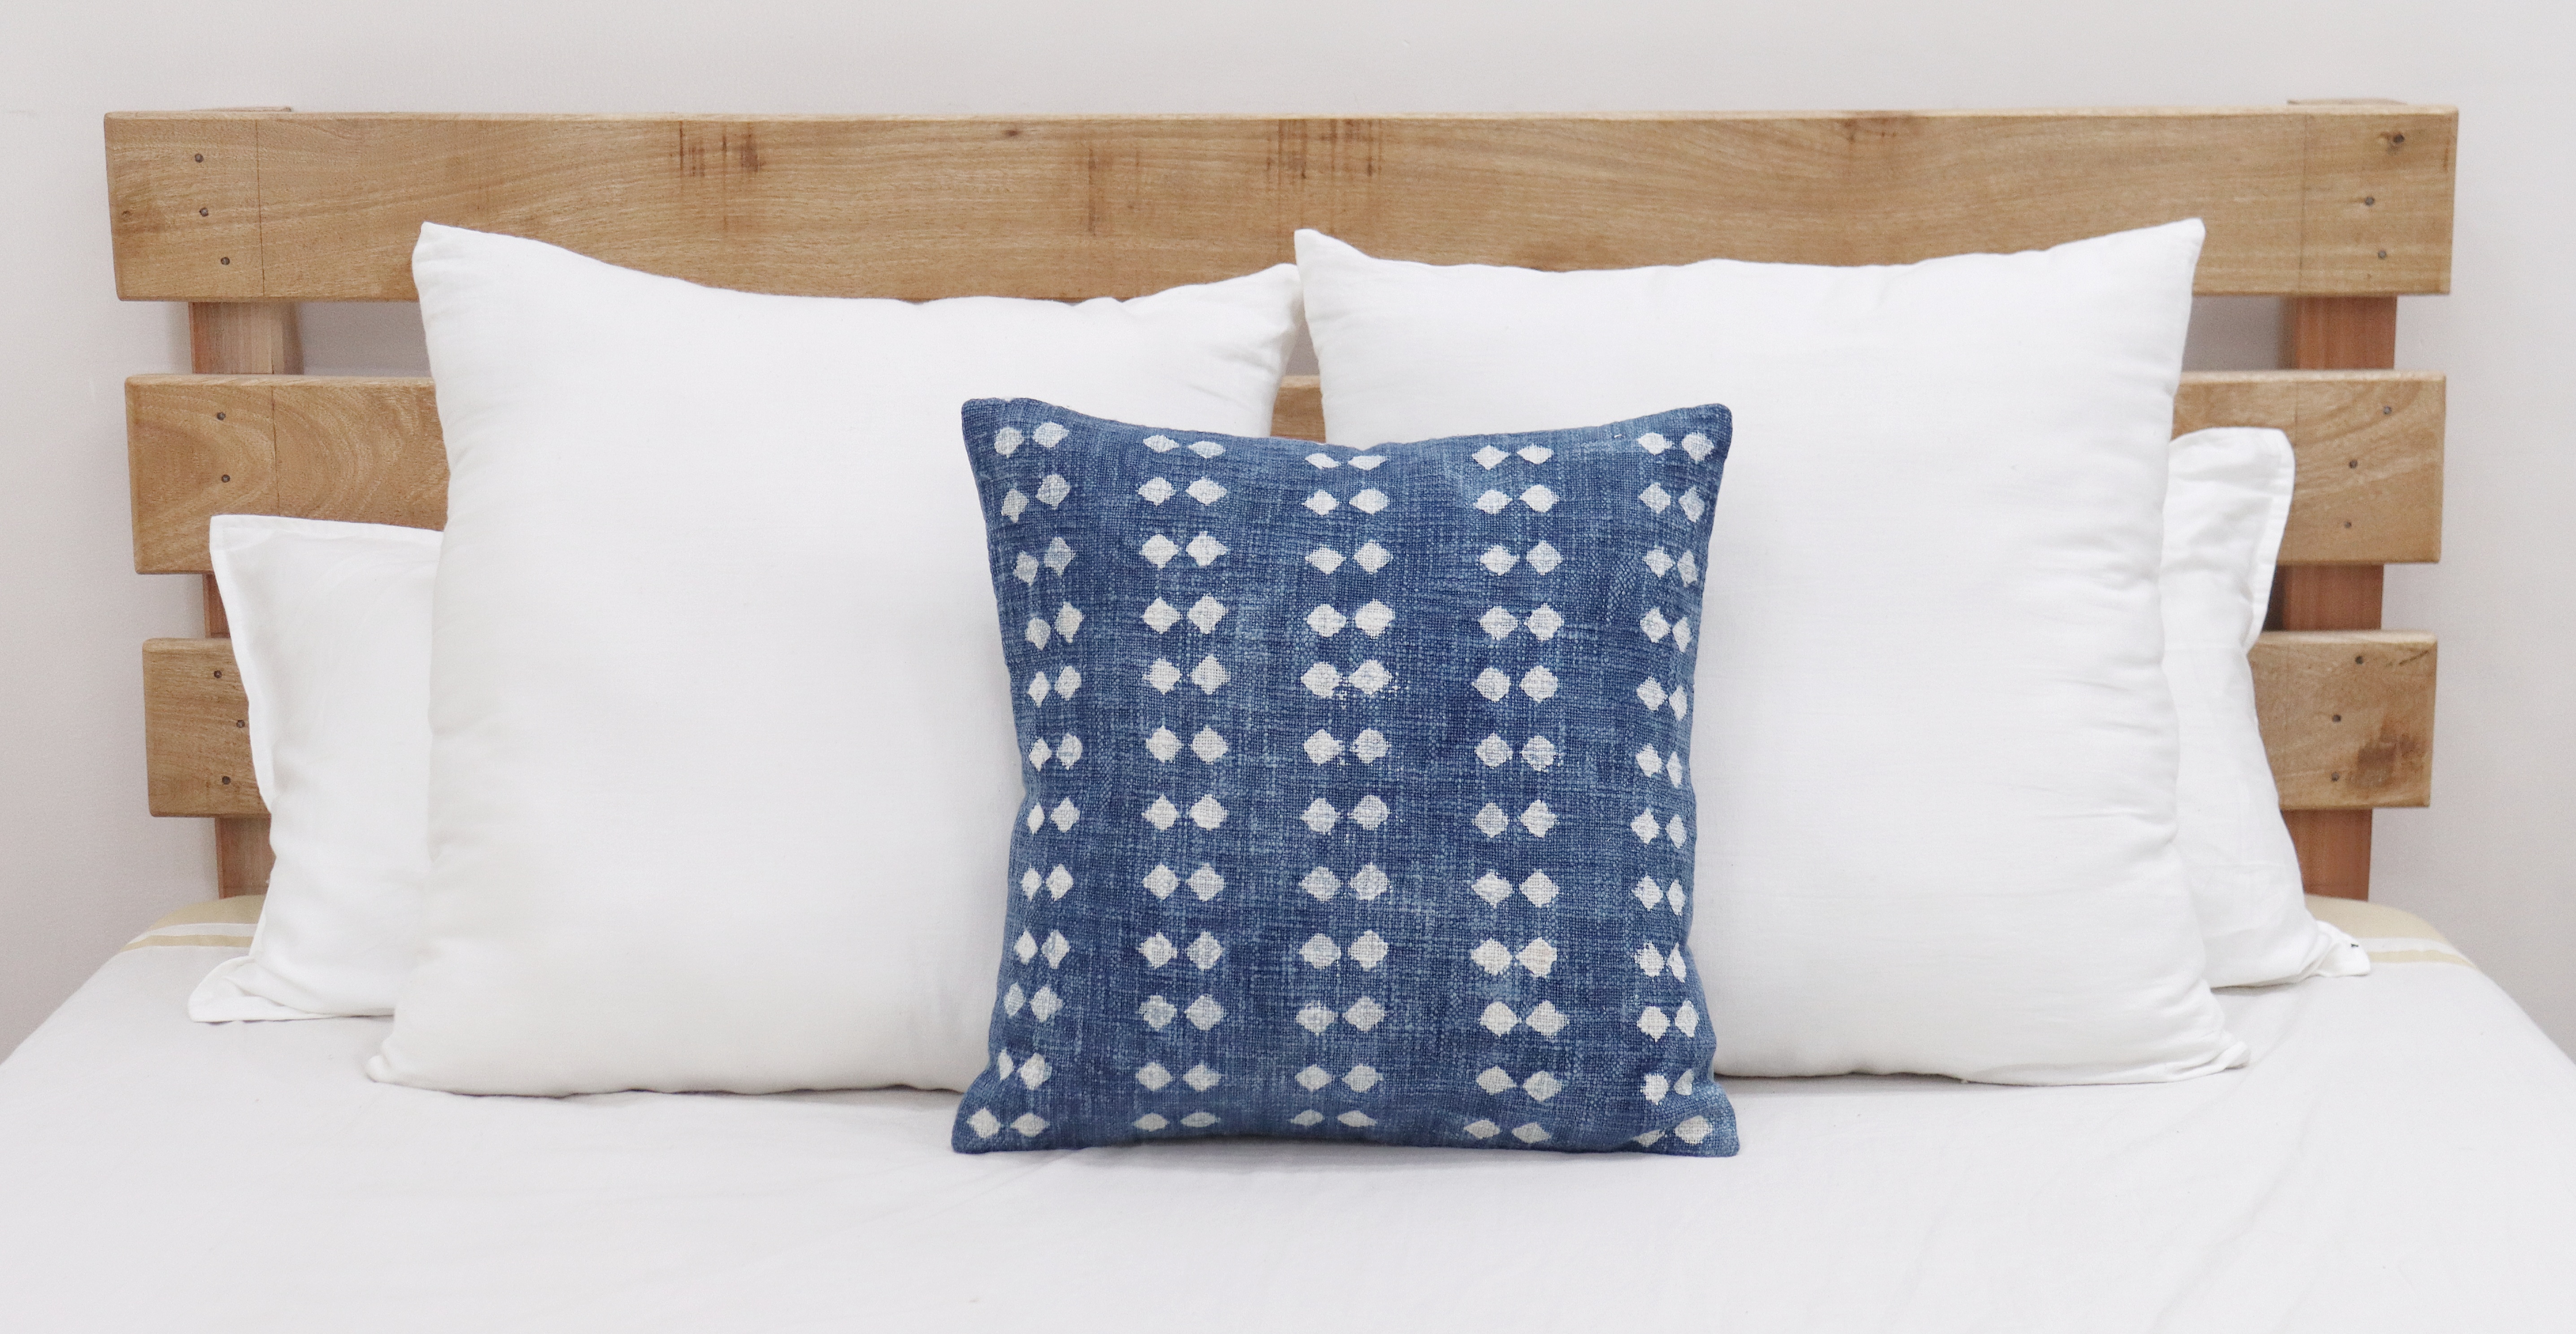 Boutique quality pillow cases | Artistic hand-printed pillow